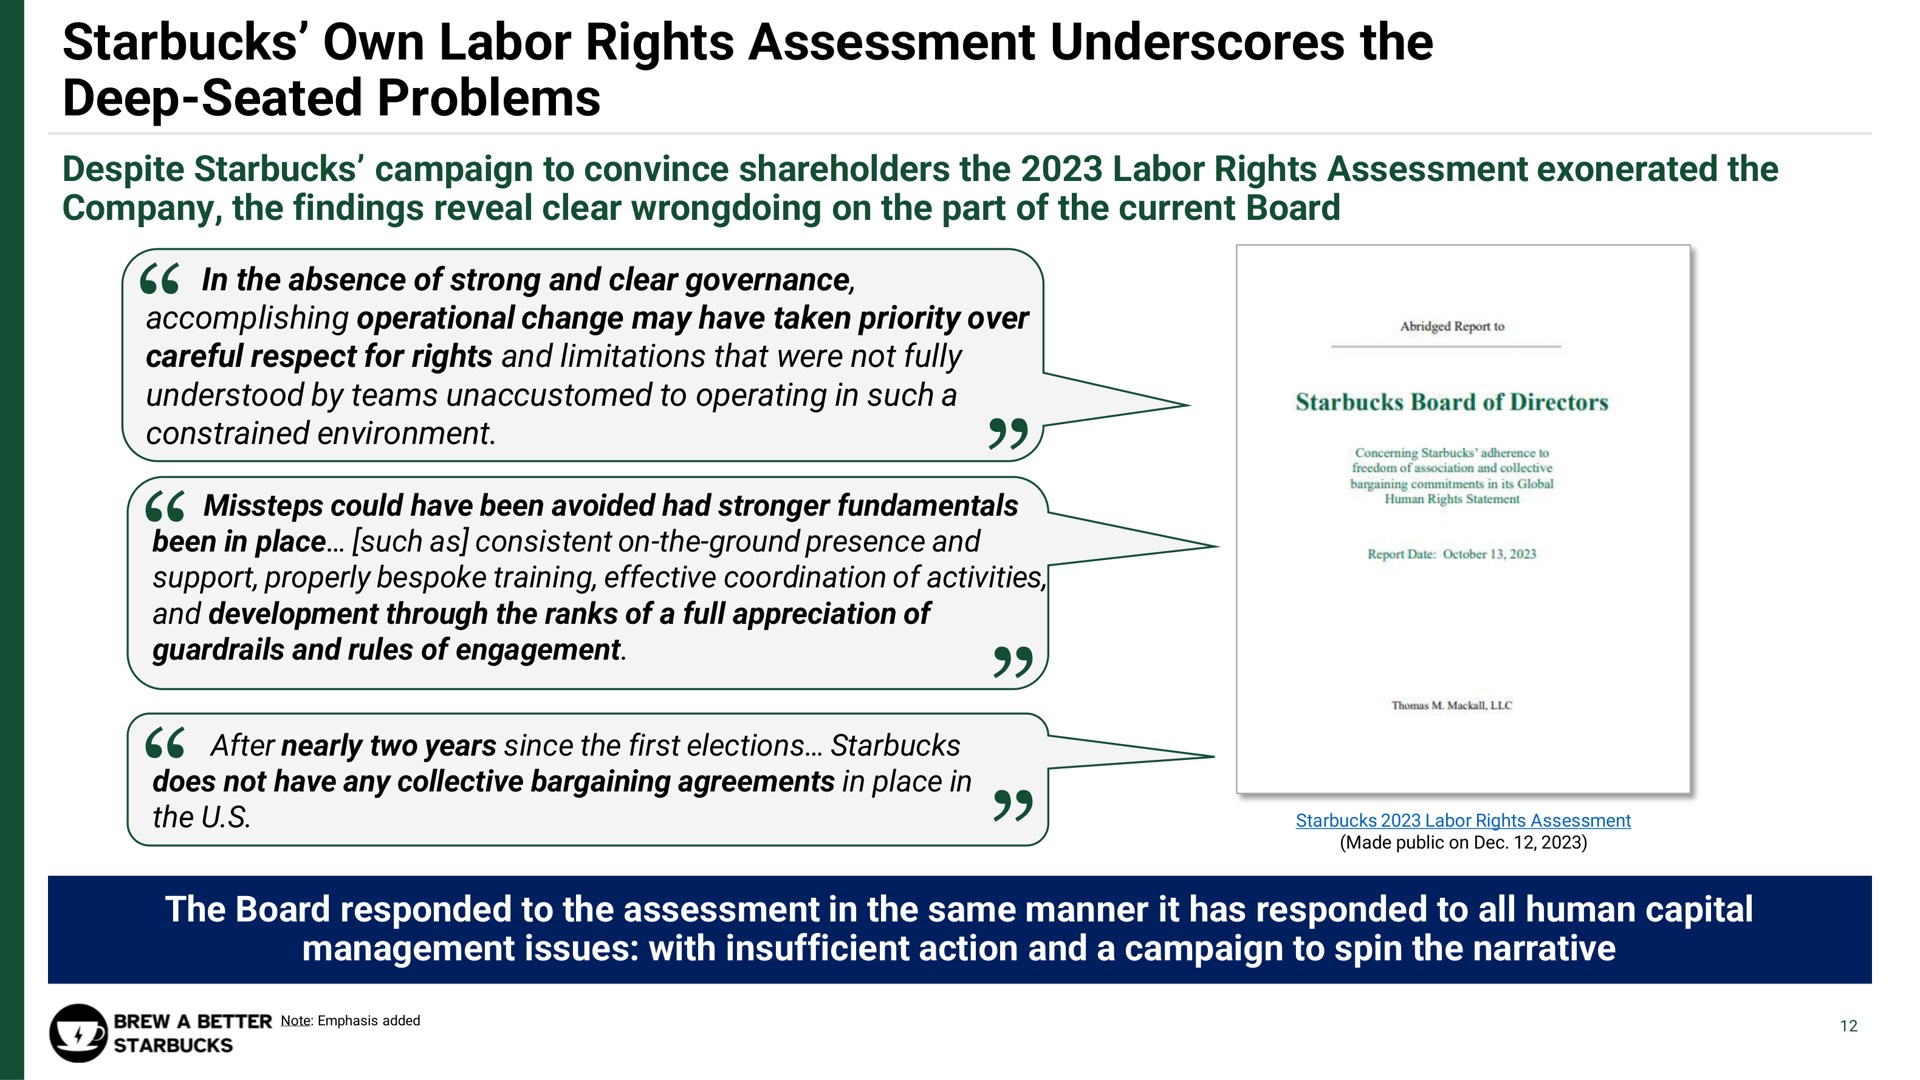 own labor rights assessment underscores the deep seated problems | Strategic Organizing Center